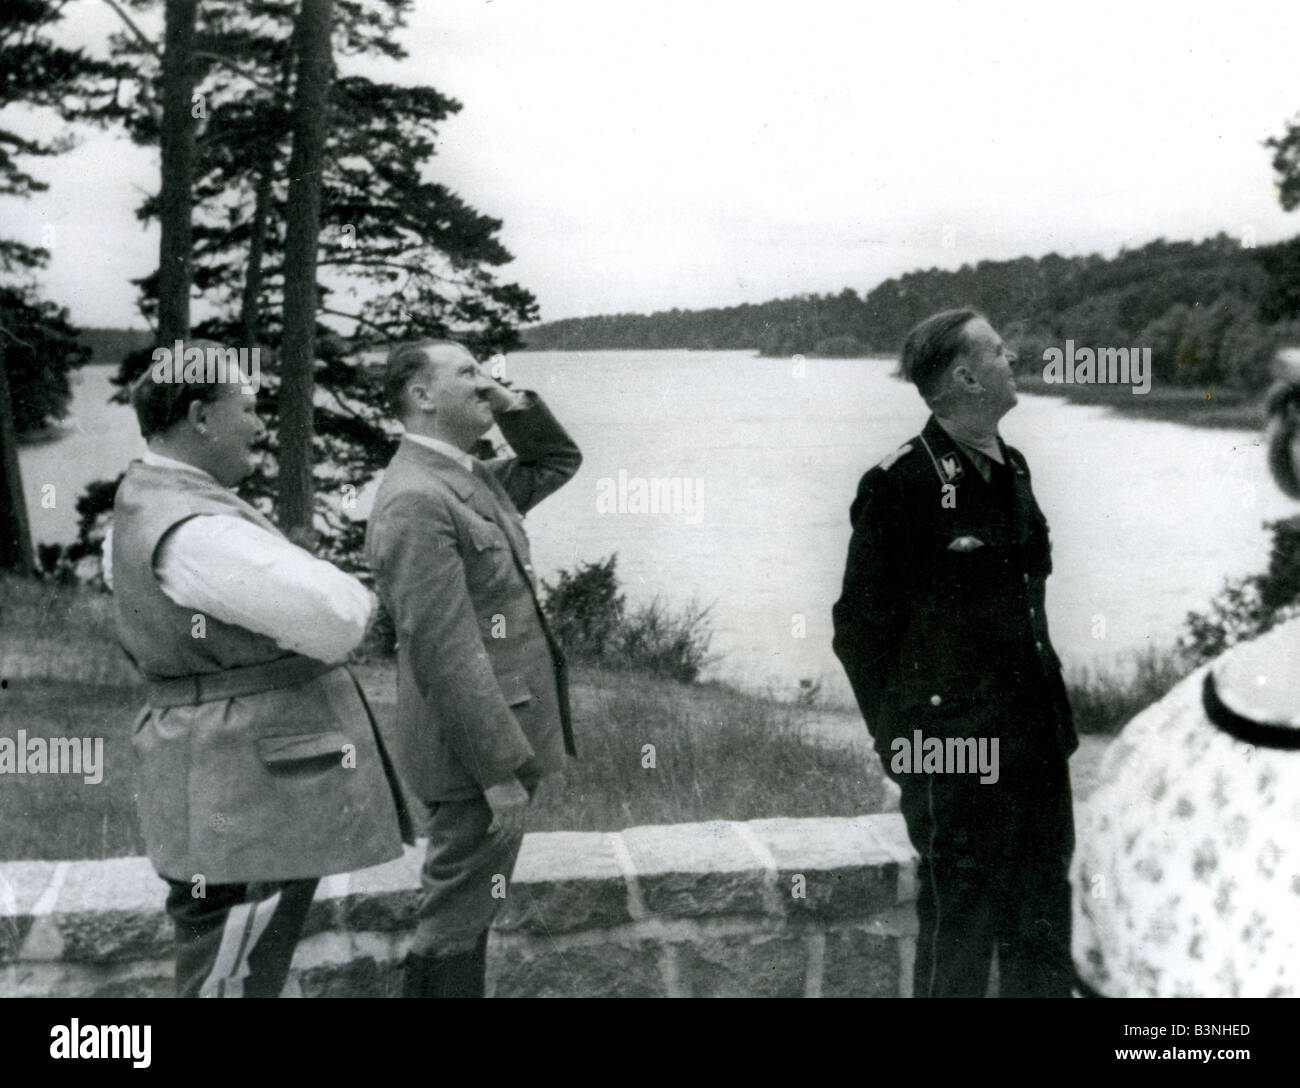 HERMAN GOERING  shows Hitler and unidentified officer  around part of his Karinhall estate northwest of Berlin. Stock Photo